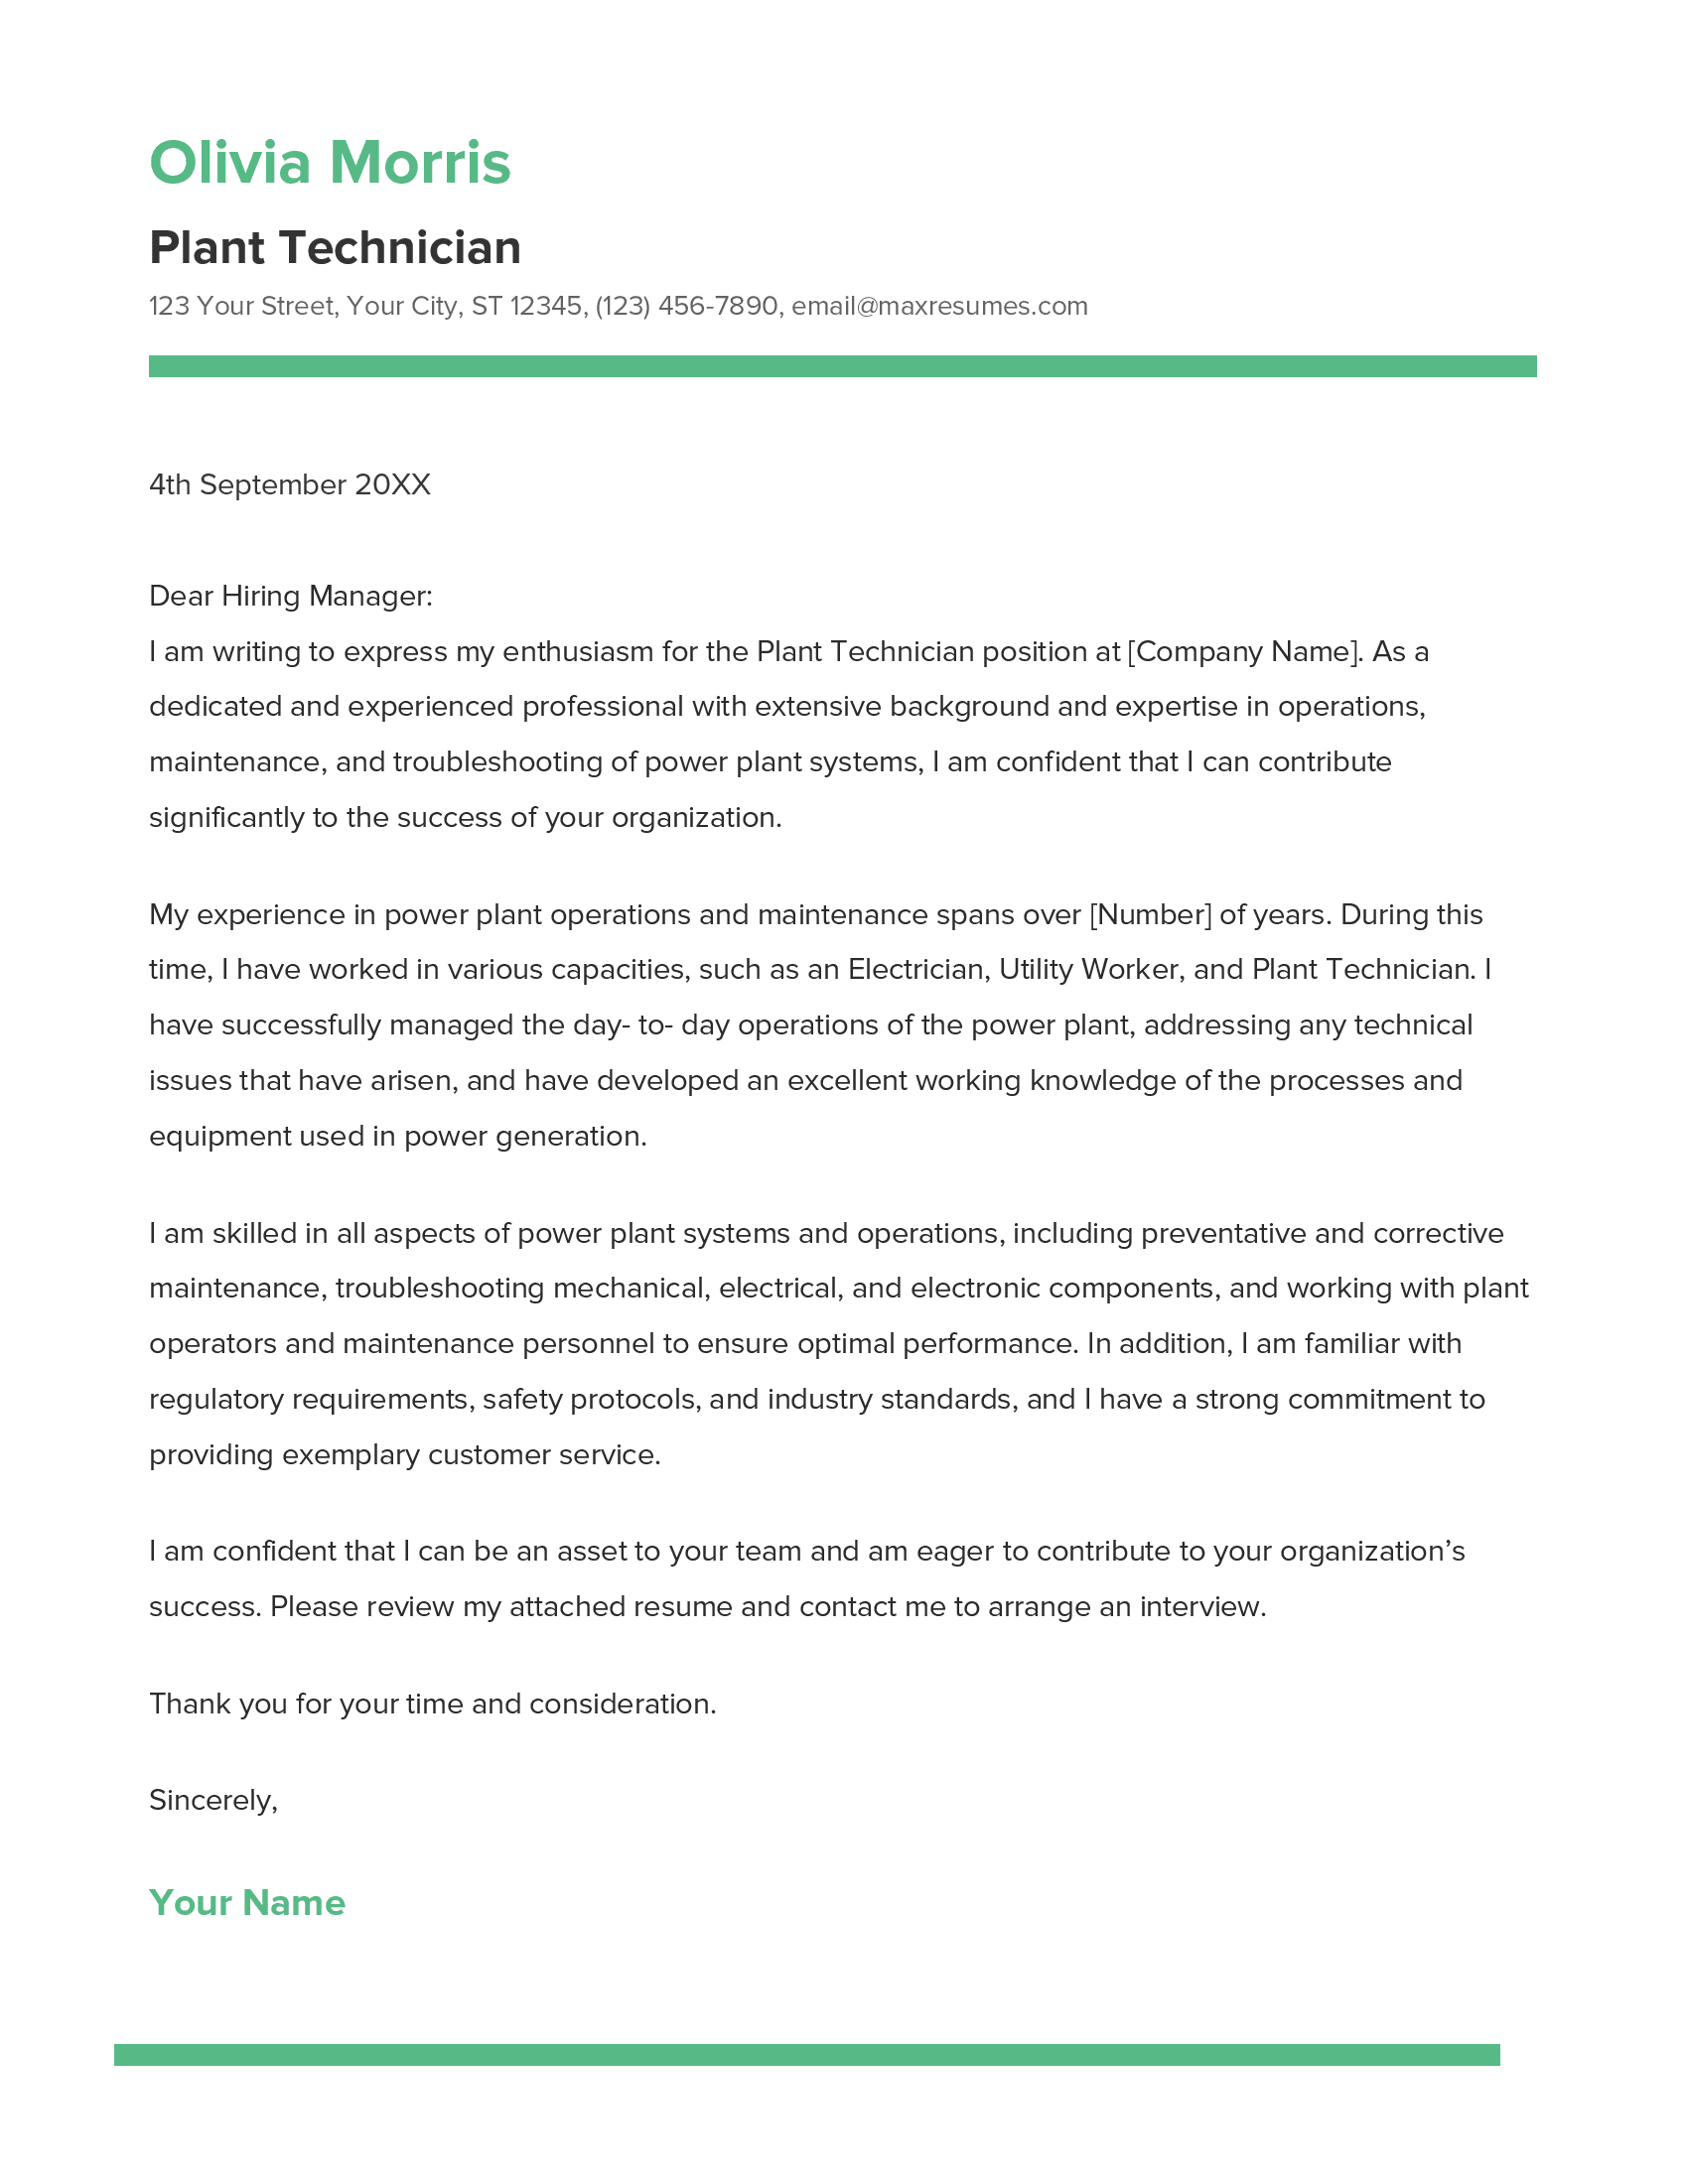 Plant Technician Cover Letter Example